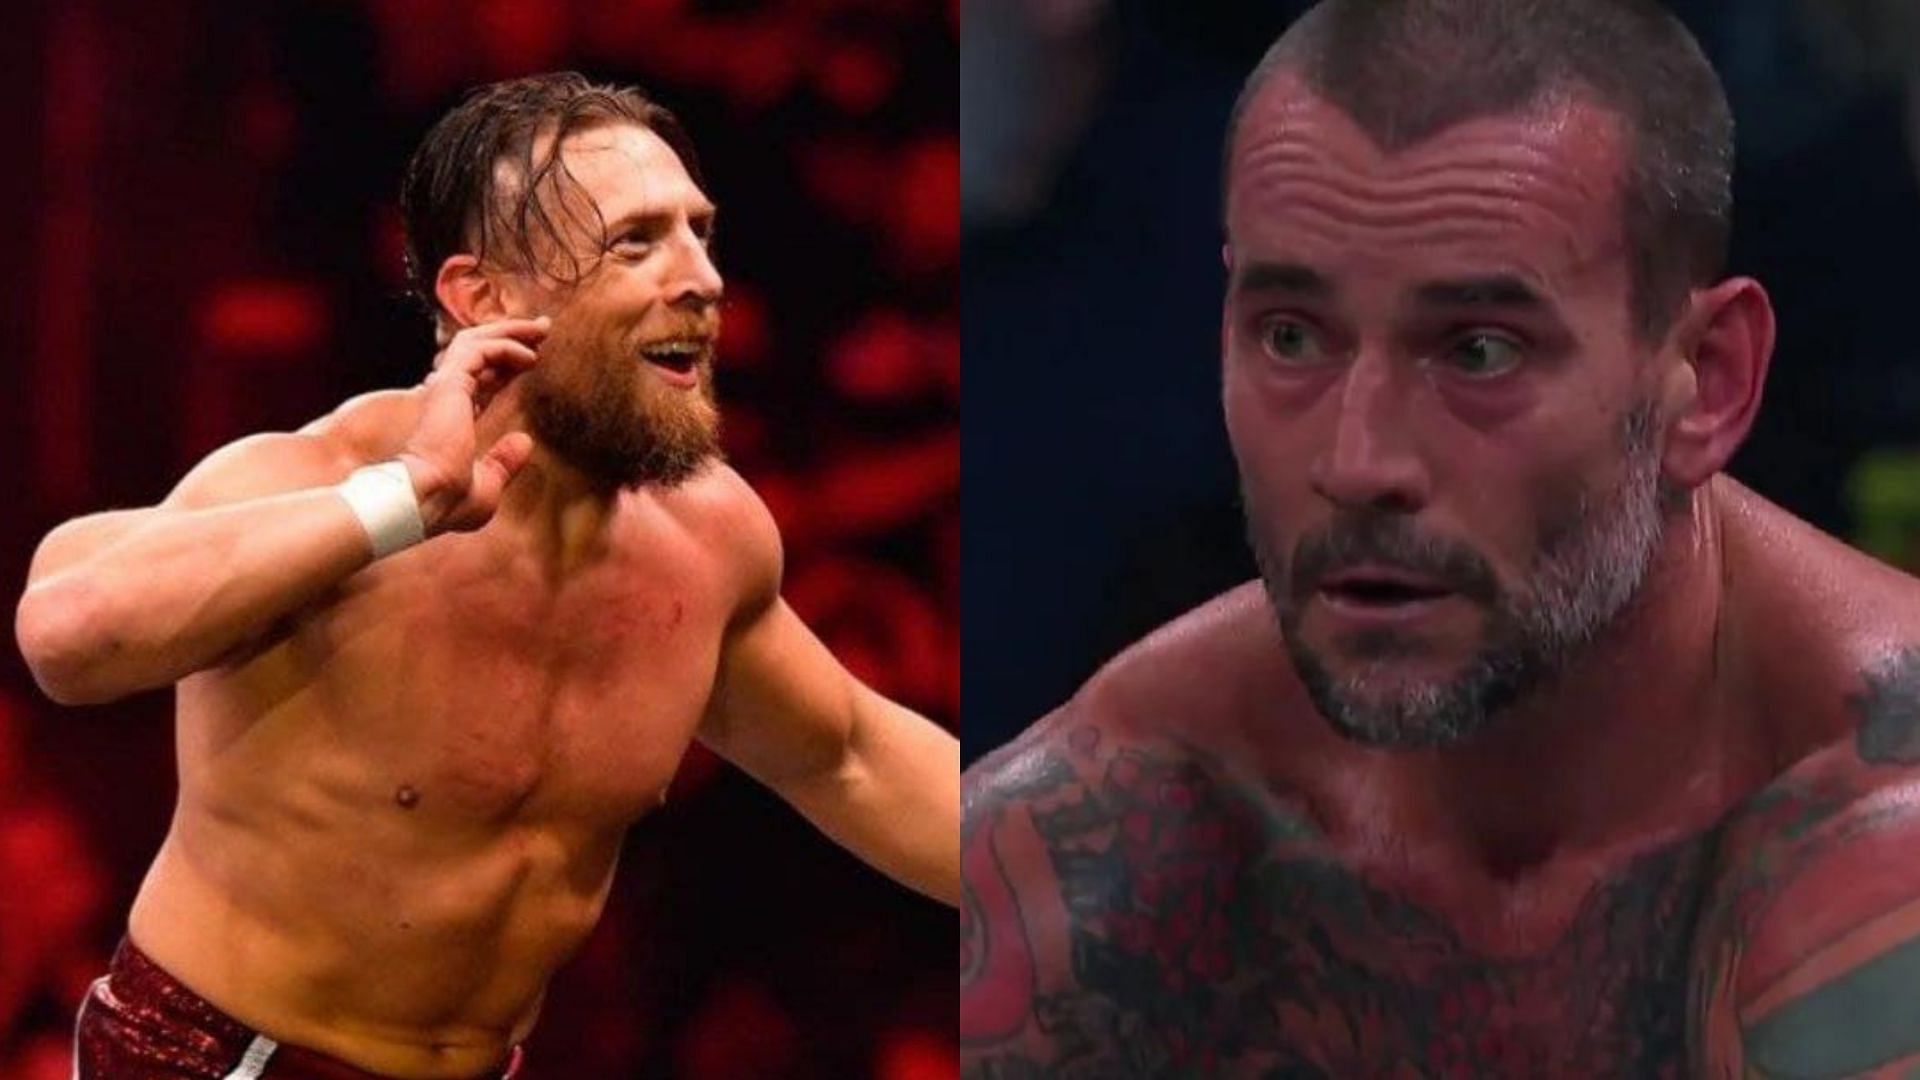 Bryan Danielson was reportedly part of the discipline committee that decided to release CM Punk